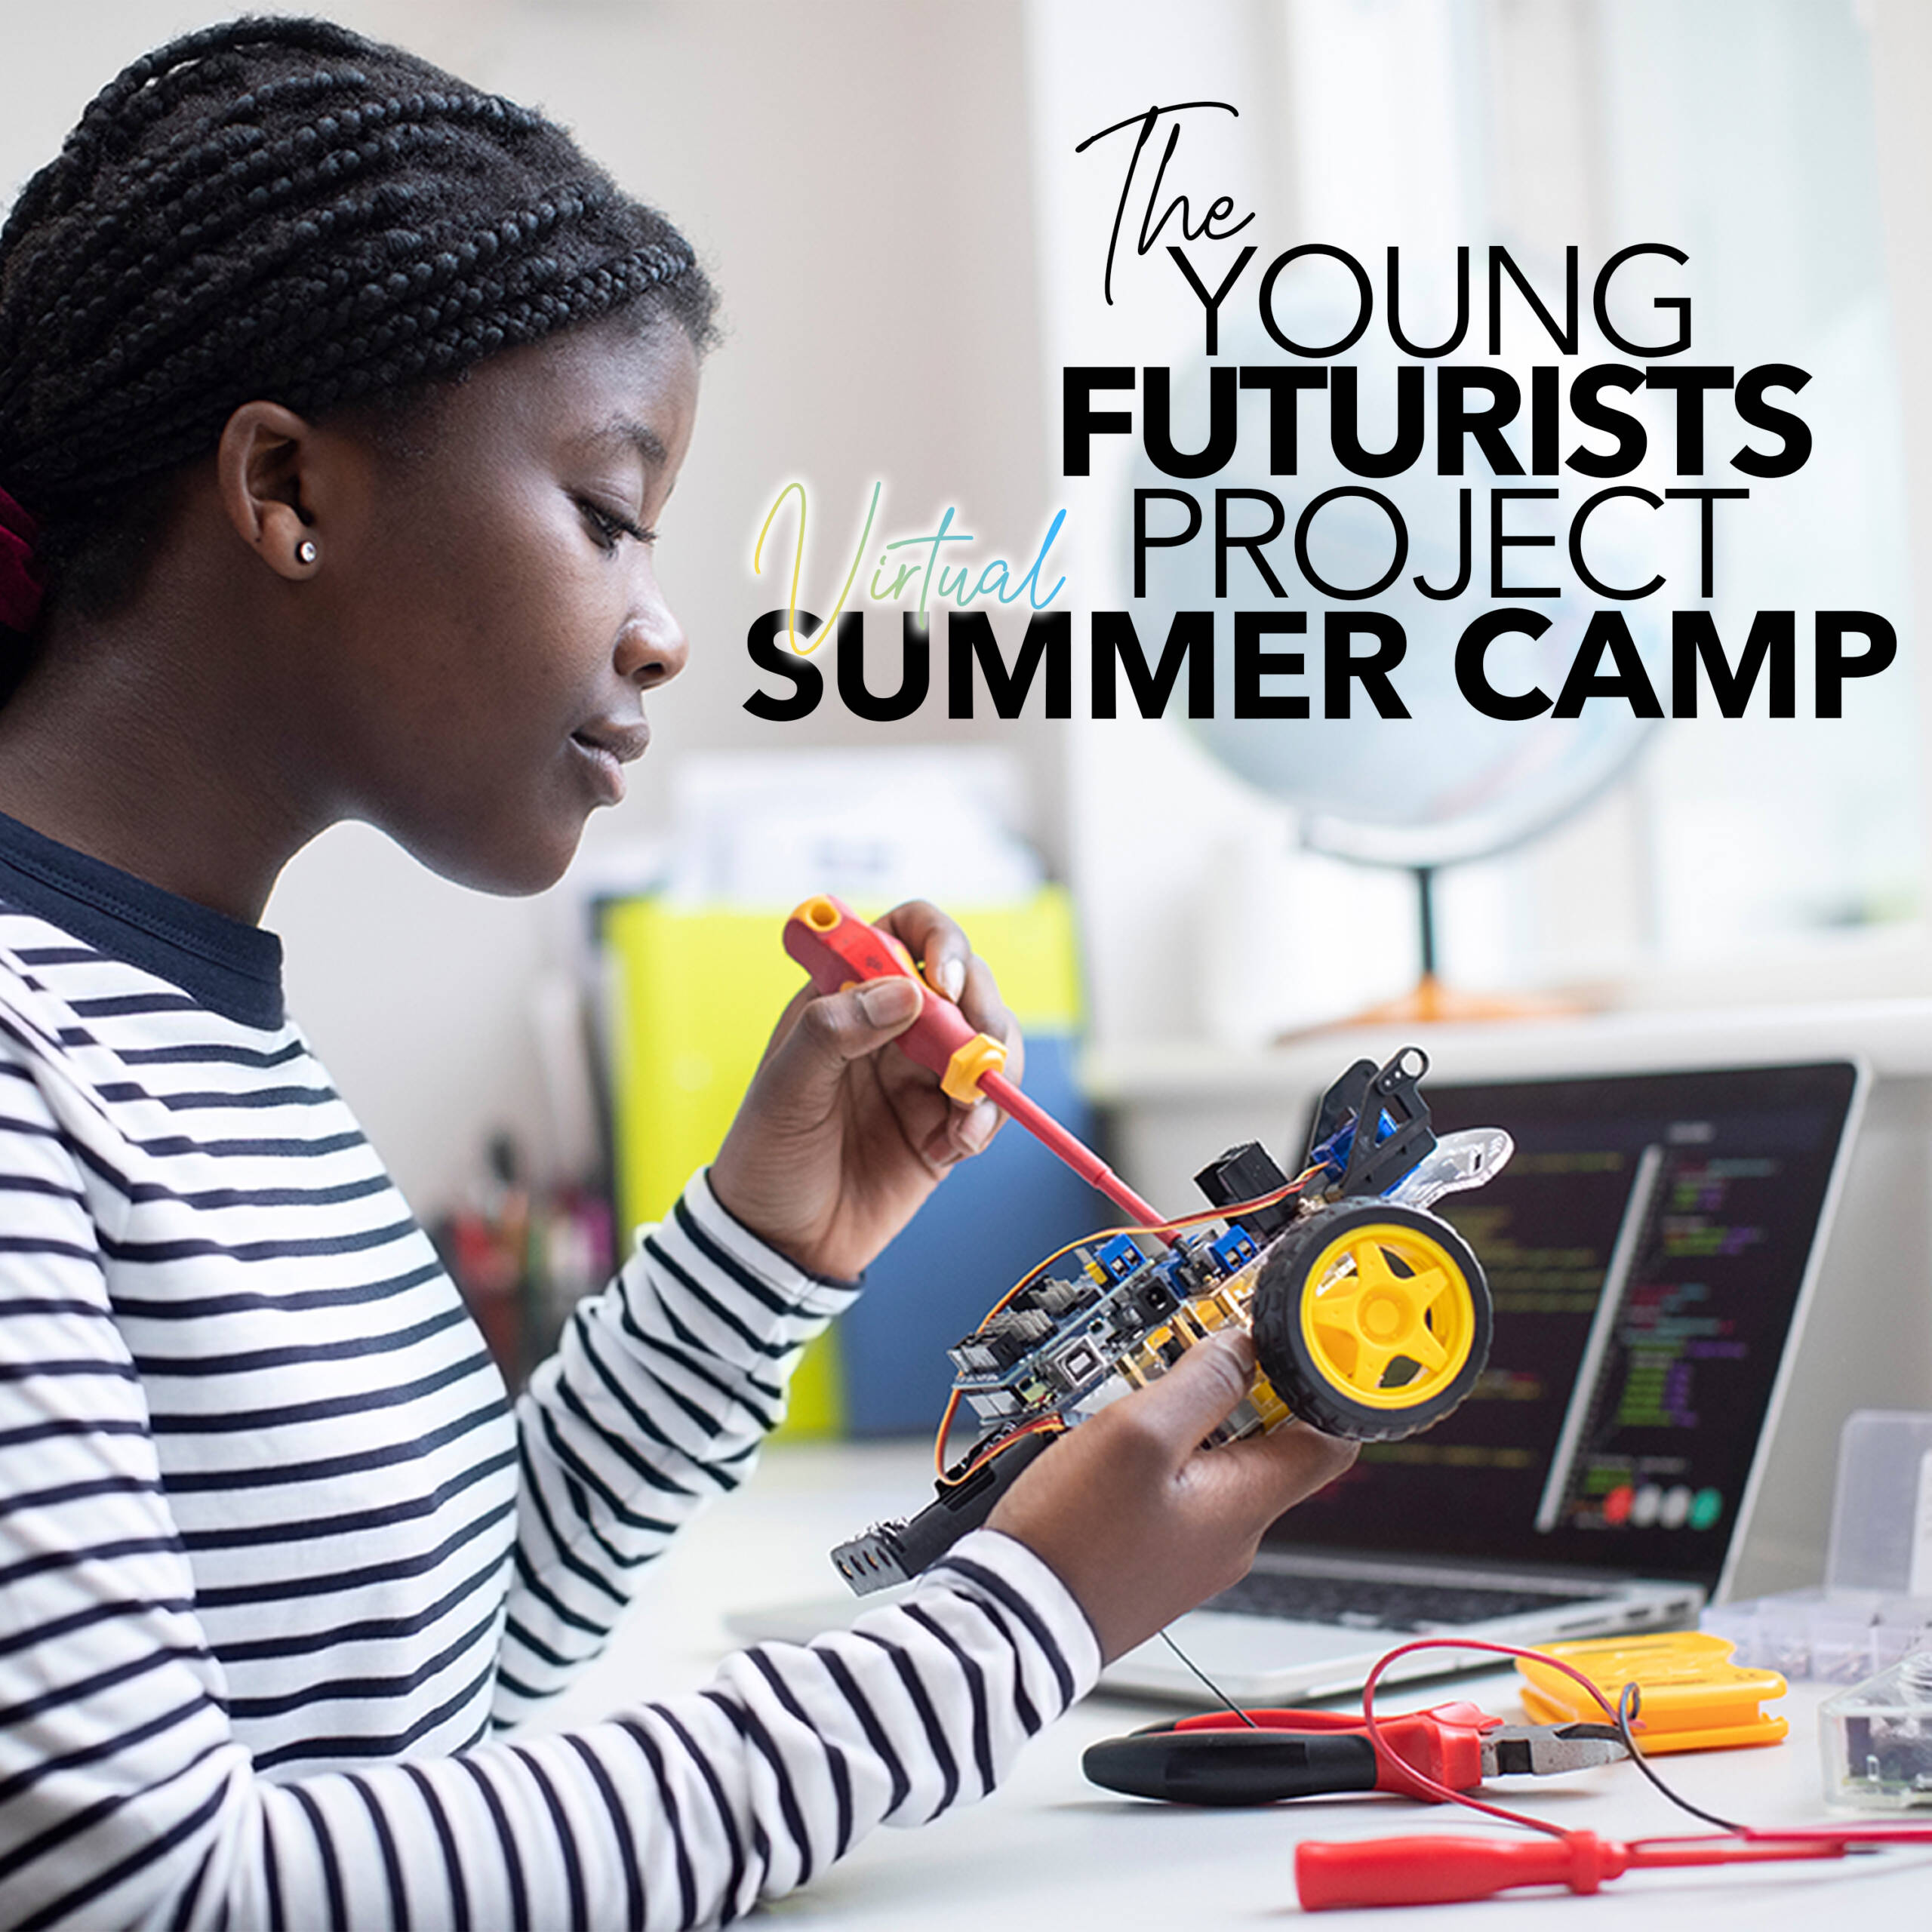 The Young Futurist Project